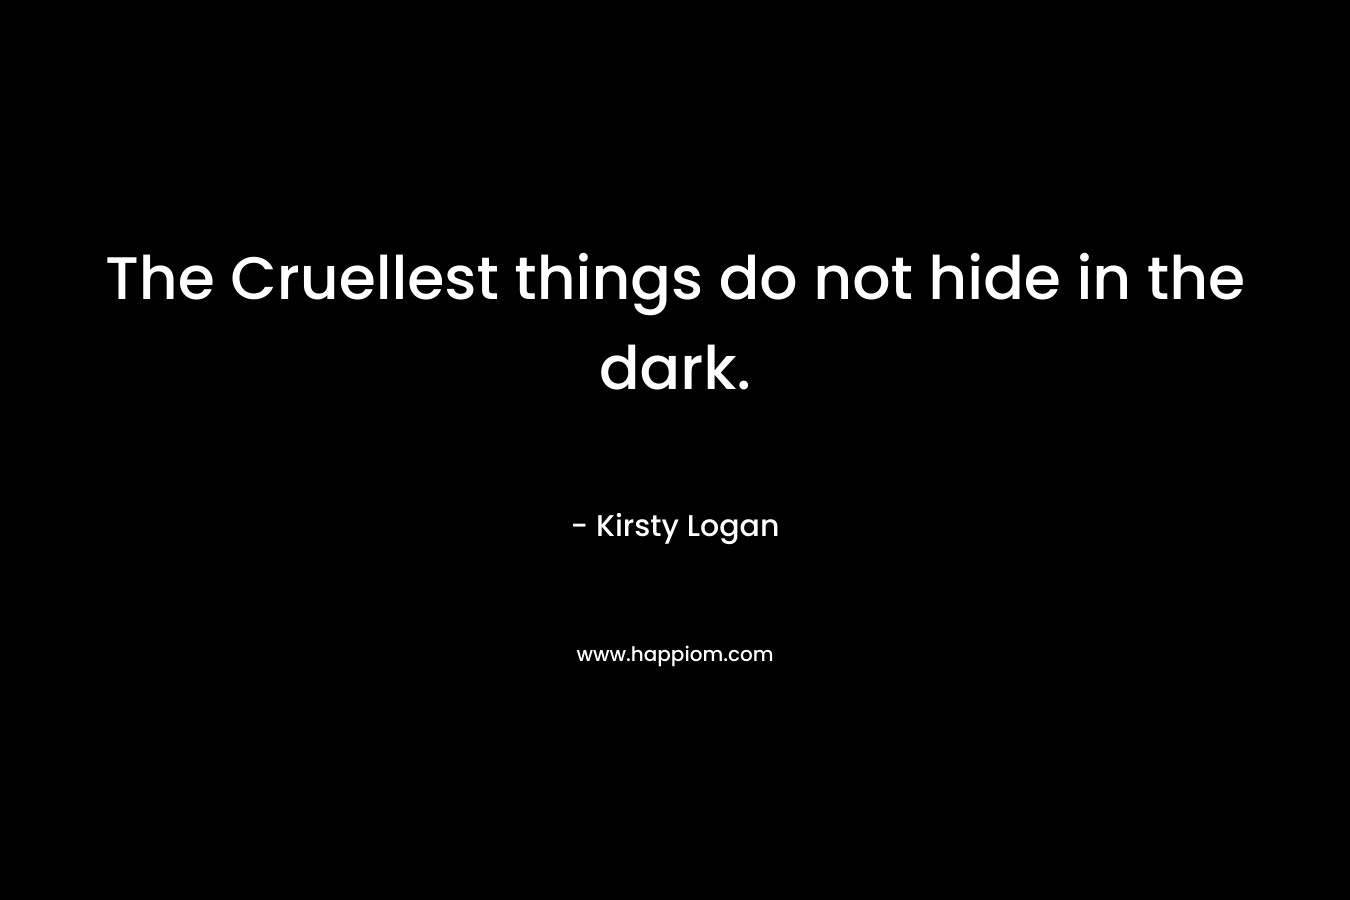 The Cruellest things do not hide in the dark.